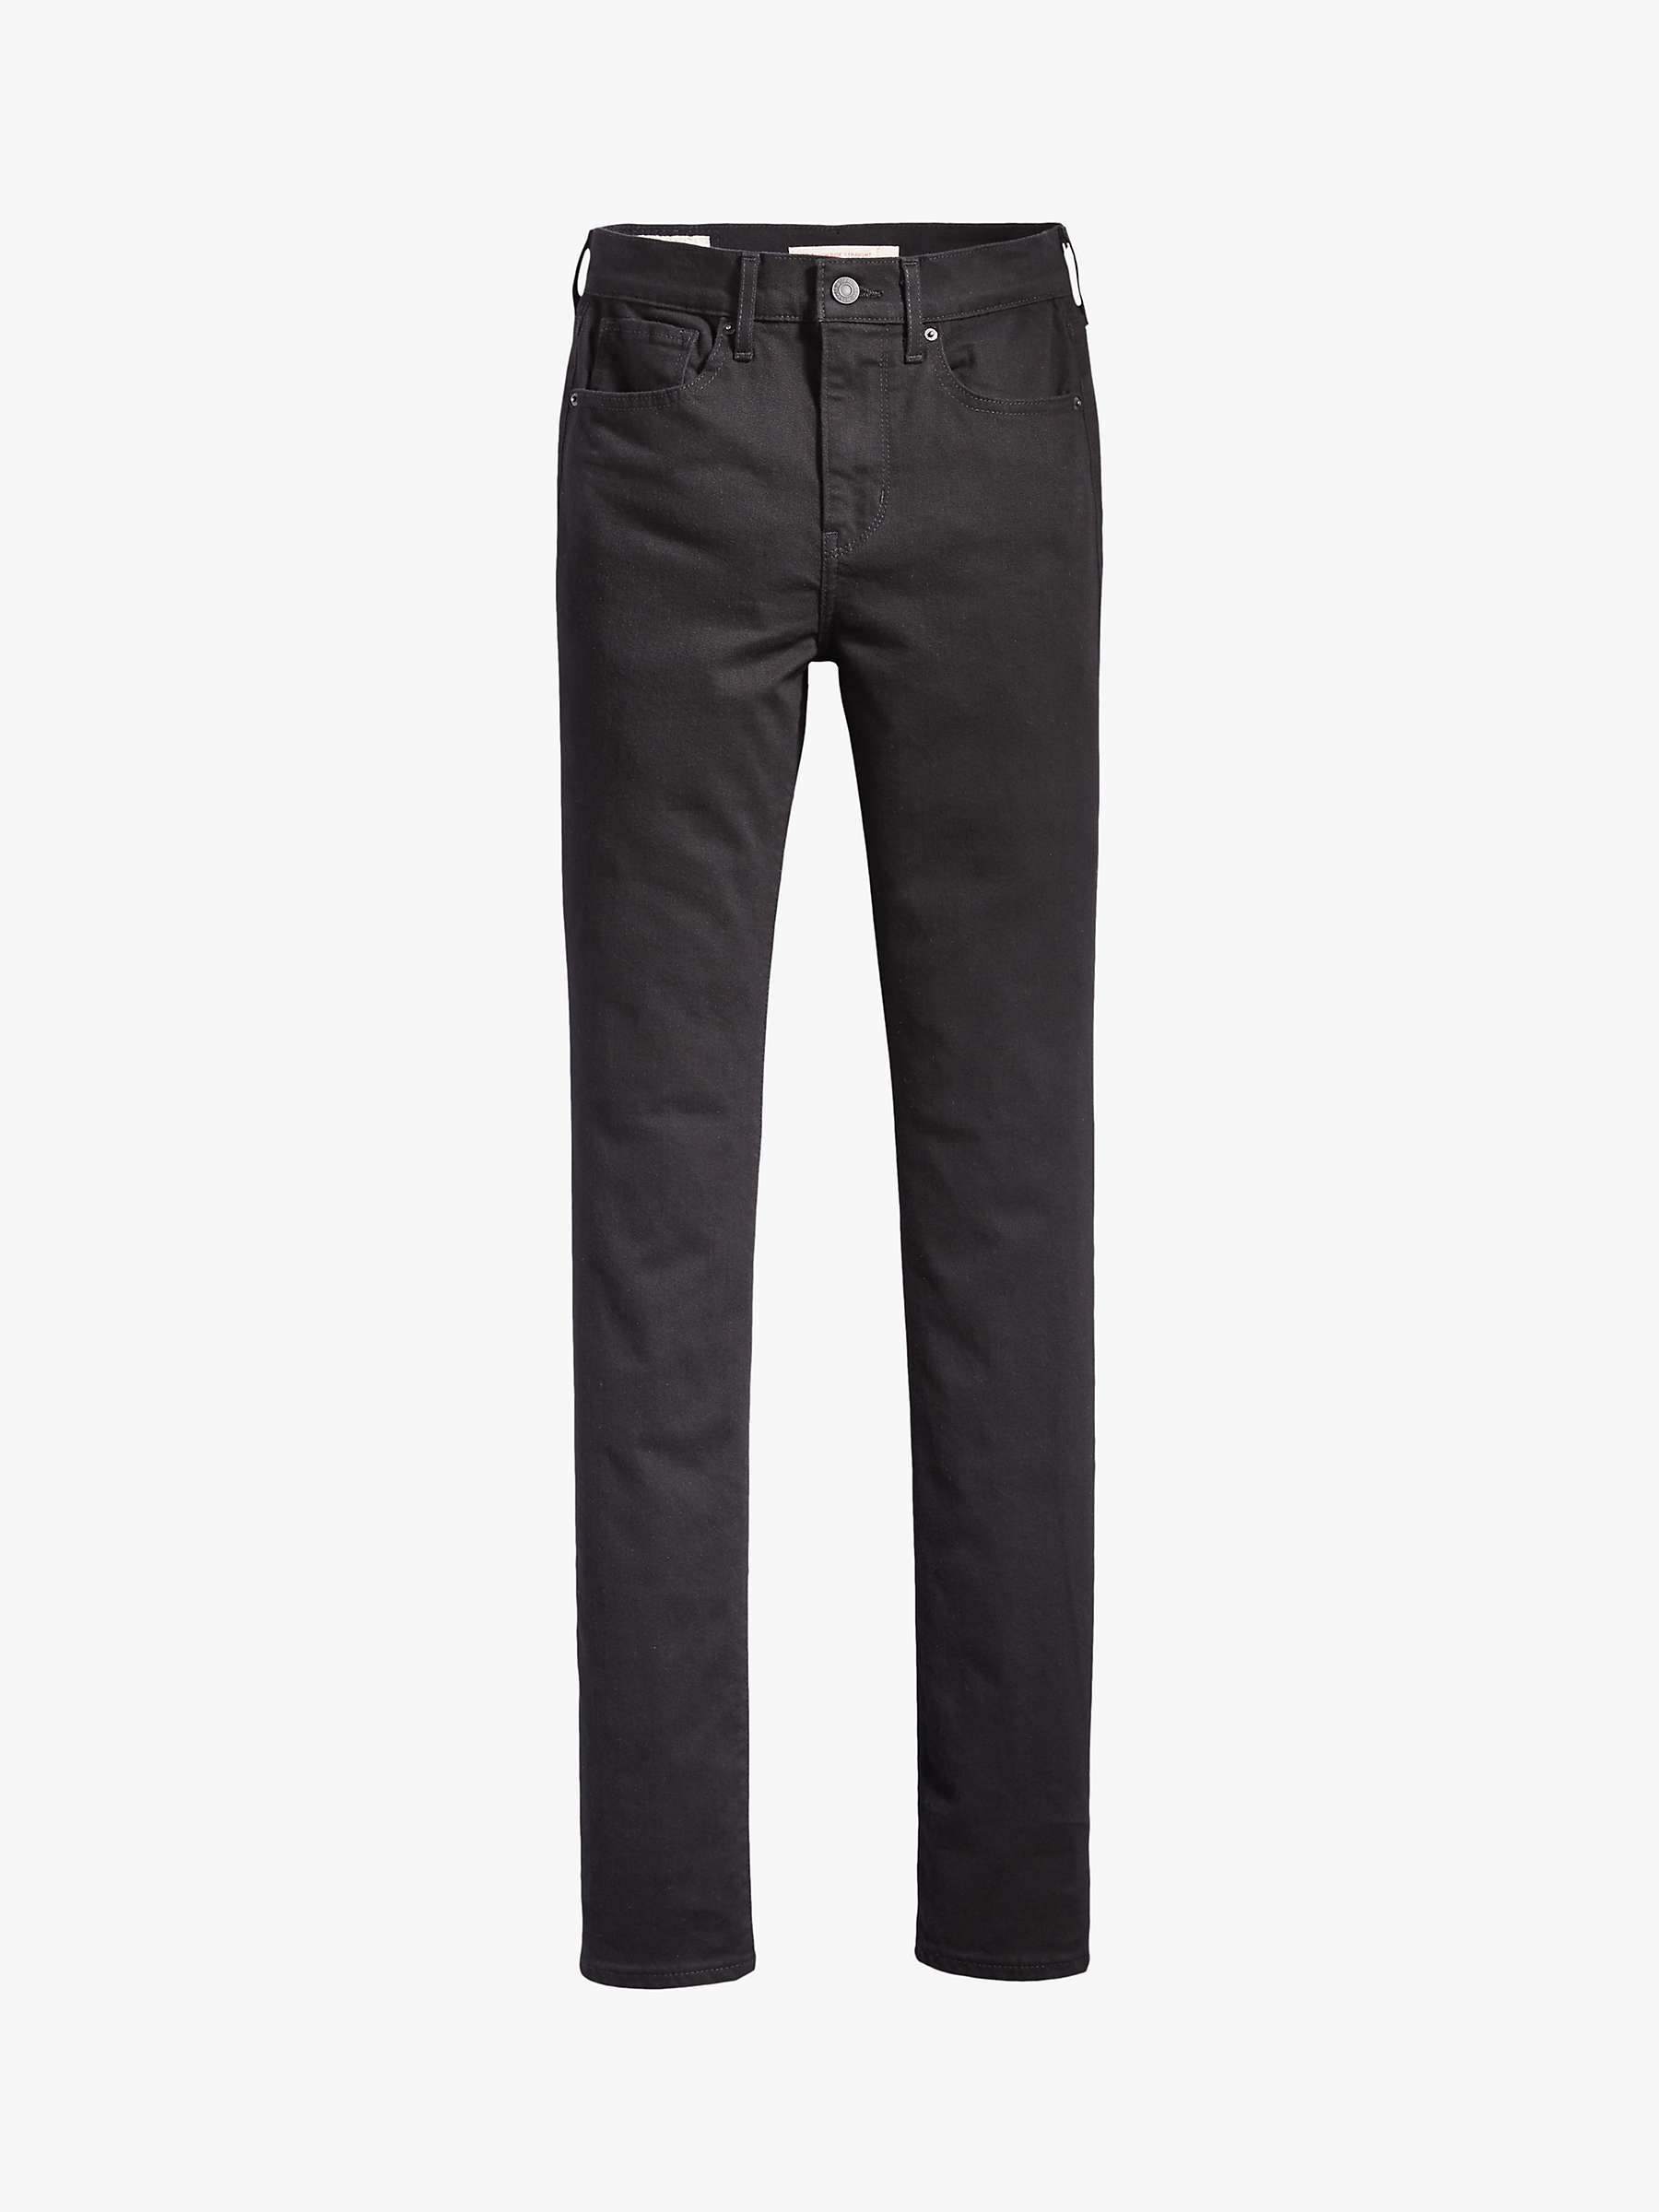 Levi's 724 High Rise Straight Cut Jeans, Night Is Black at John Lewis ...